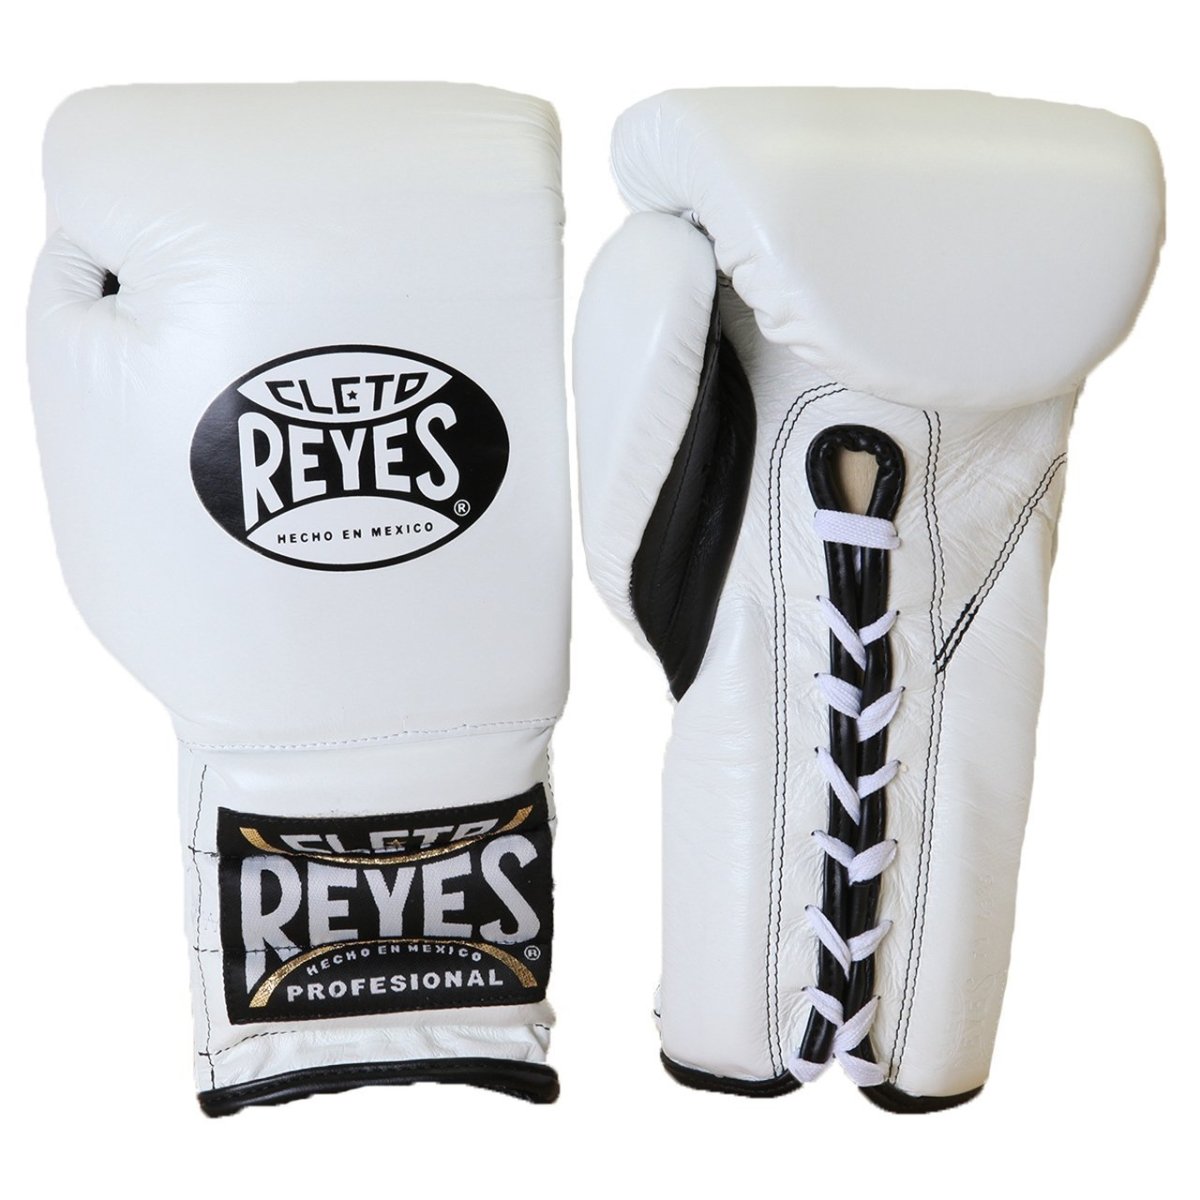 What makes Cleto Reyes's boxing gloves stand out?, by Gandrabaua